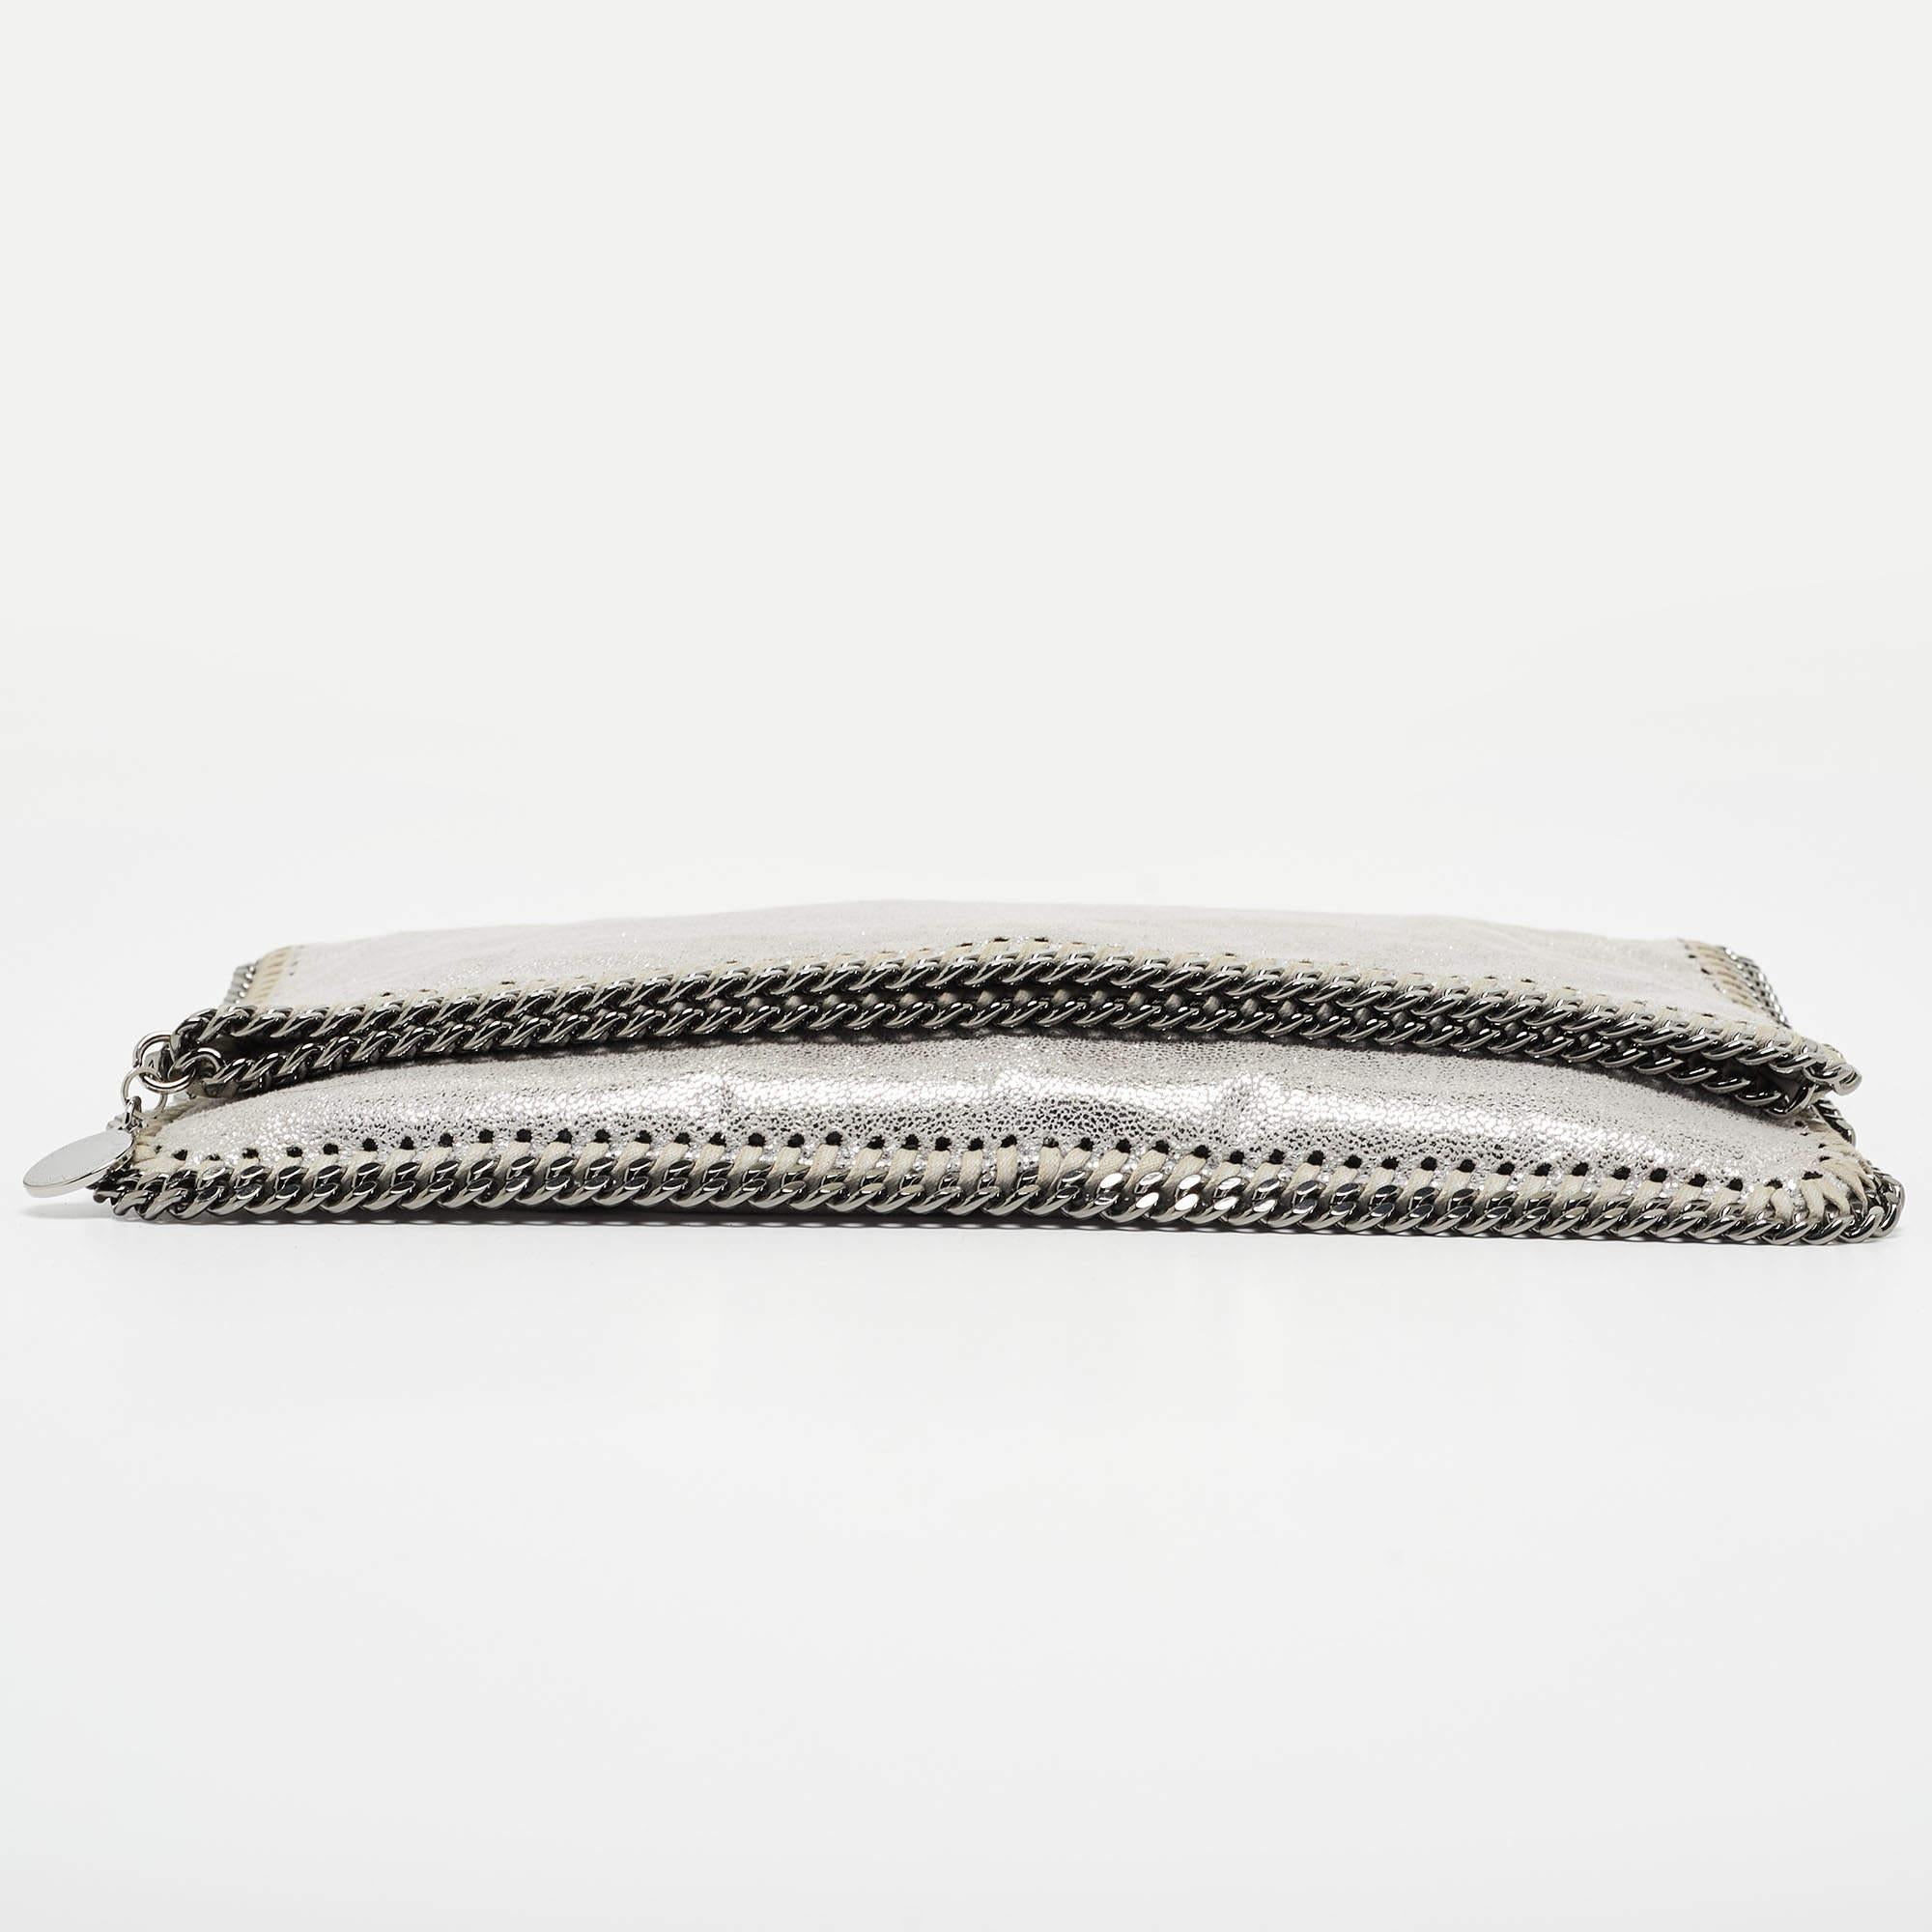 Stella McCartney Silver Faux Leather Falabella Fold-Over Clutch For Sale 4